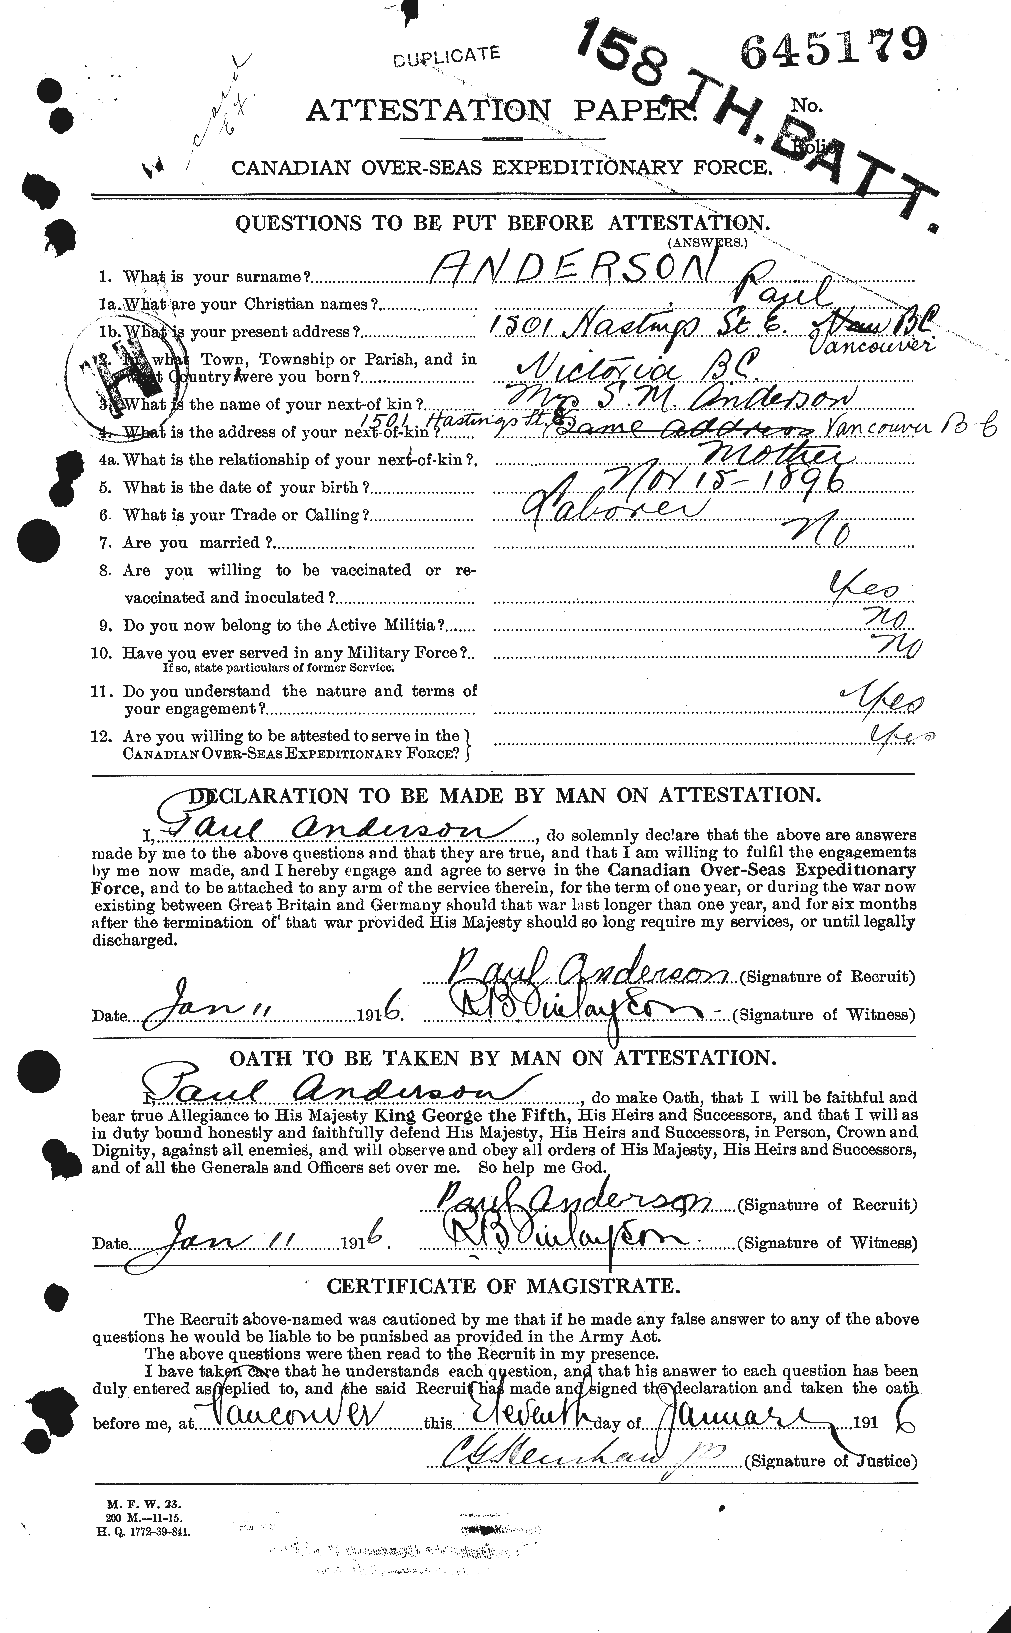 Personnel Records of the First World War - CEF 207368a